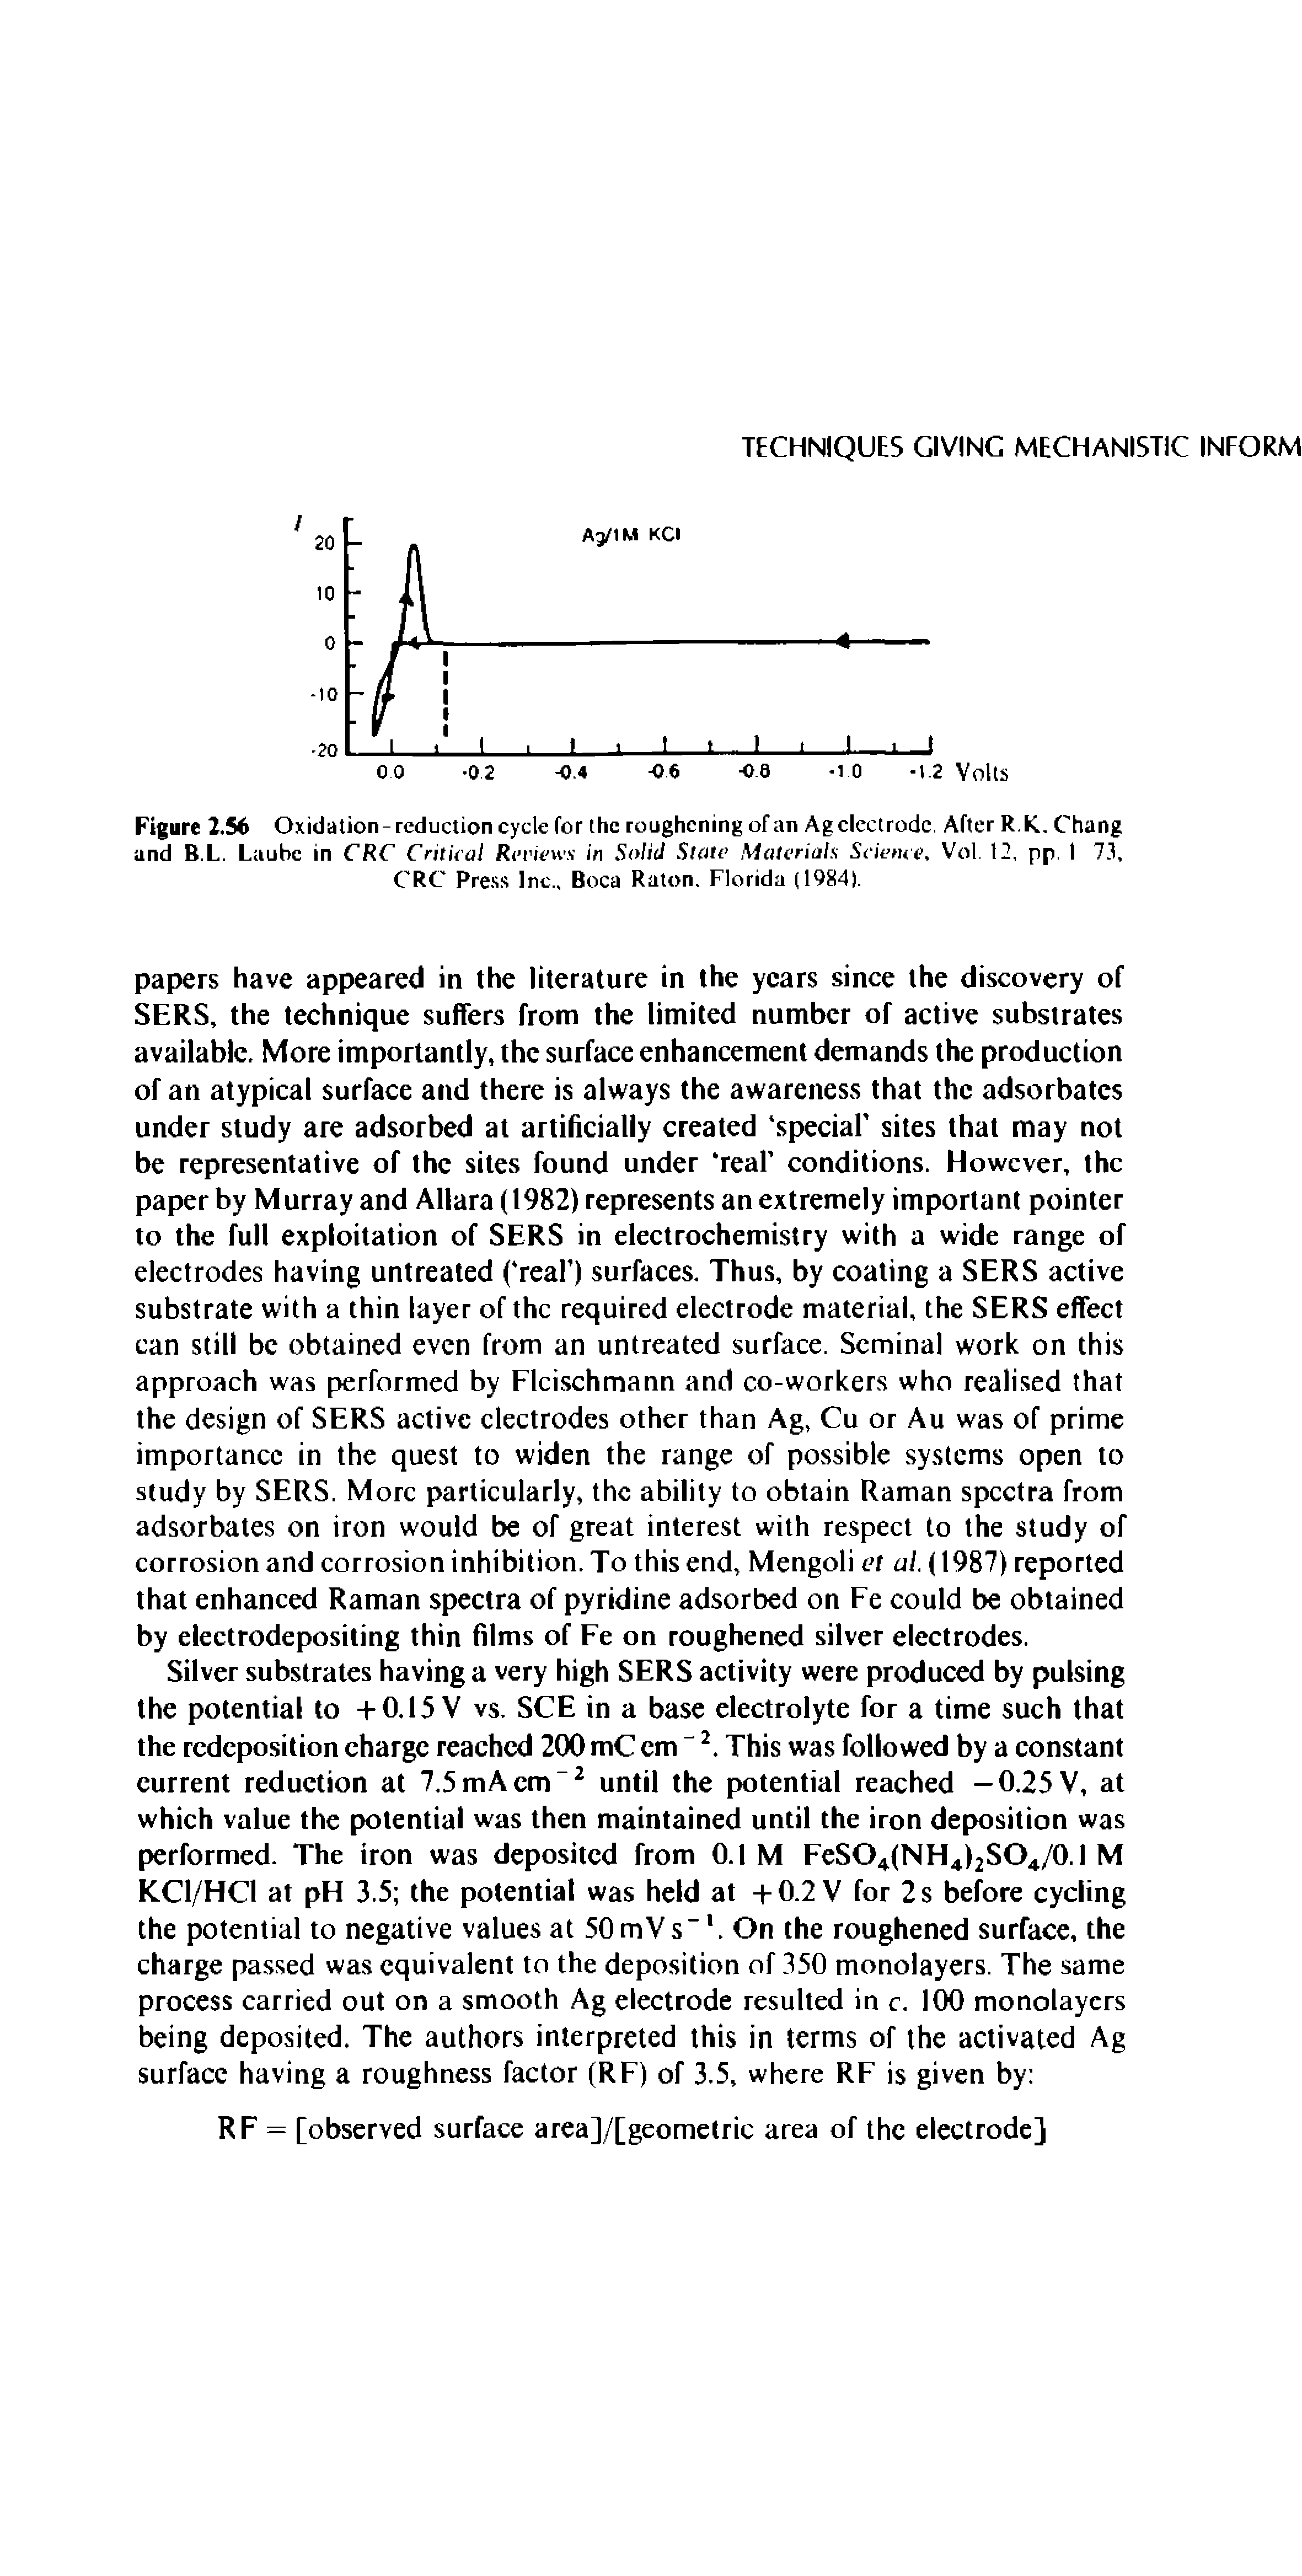 Figure 2.56 Oxidation -reduction cycle for the roughening of an Ag electrode, After R.K. Chang and B.L. Laubc in CRC Critical Reviews in Solid State Materials Science, Vol. 12, pp, 1 73, CRC Press Inc., Boca Raton, Florida (1984).